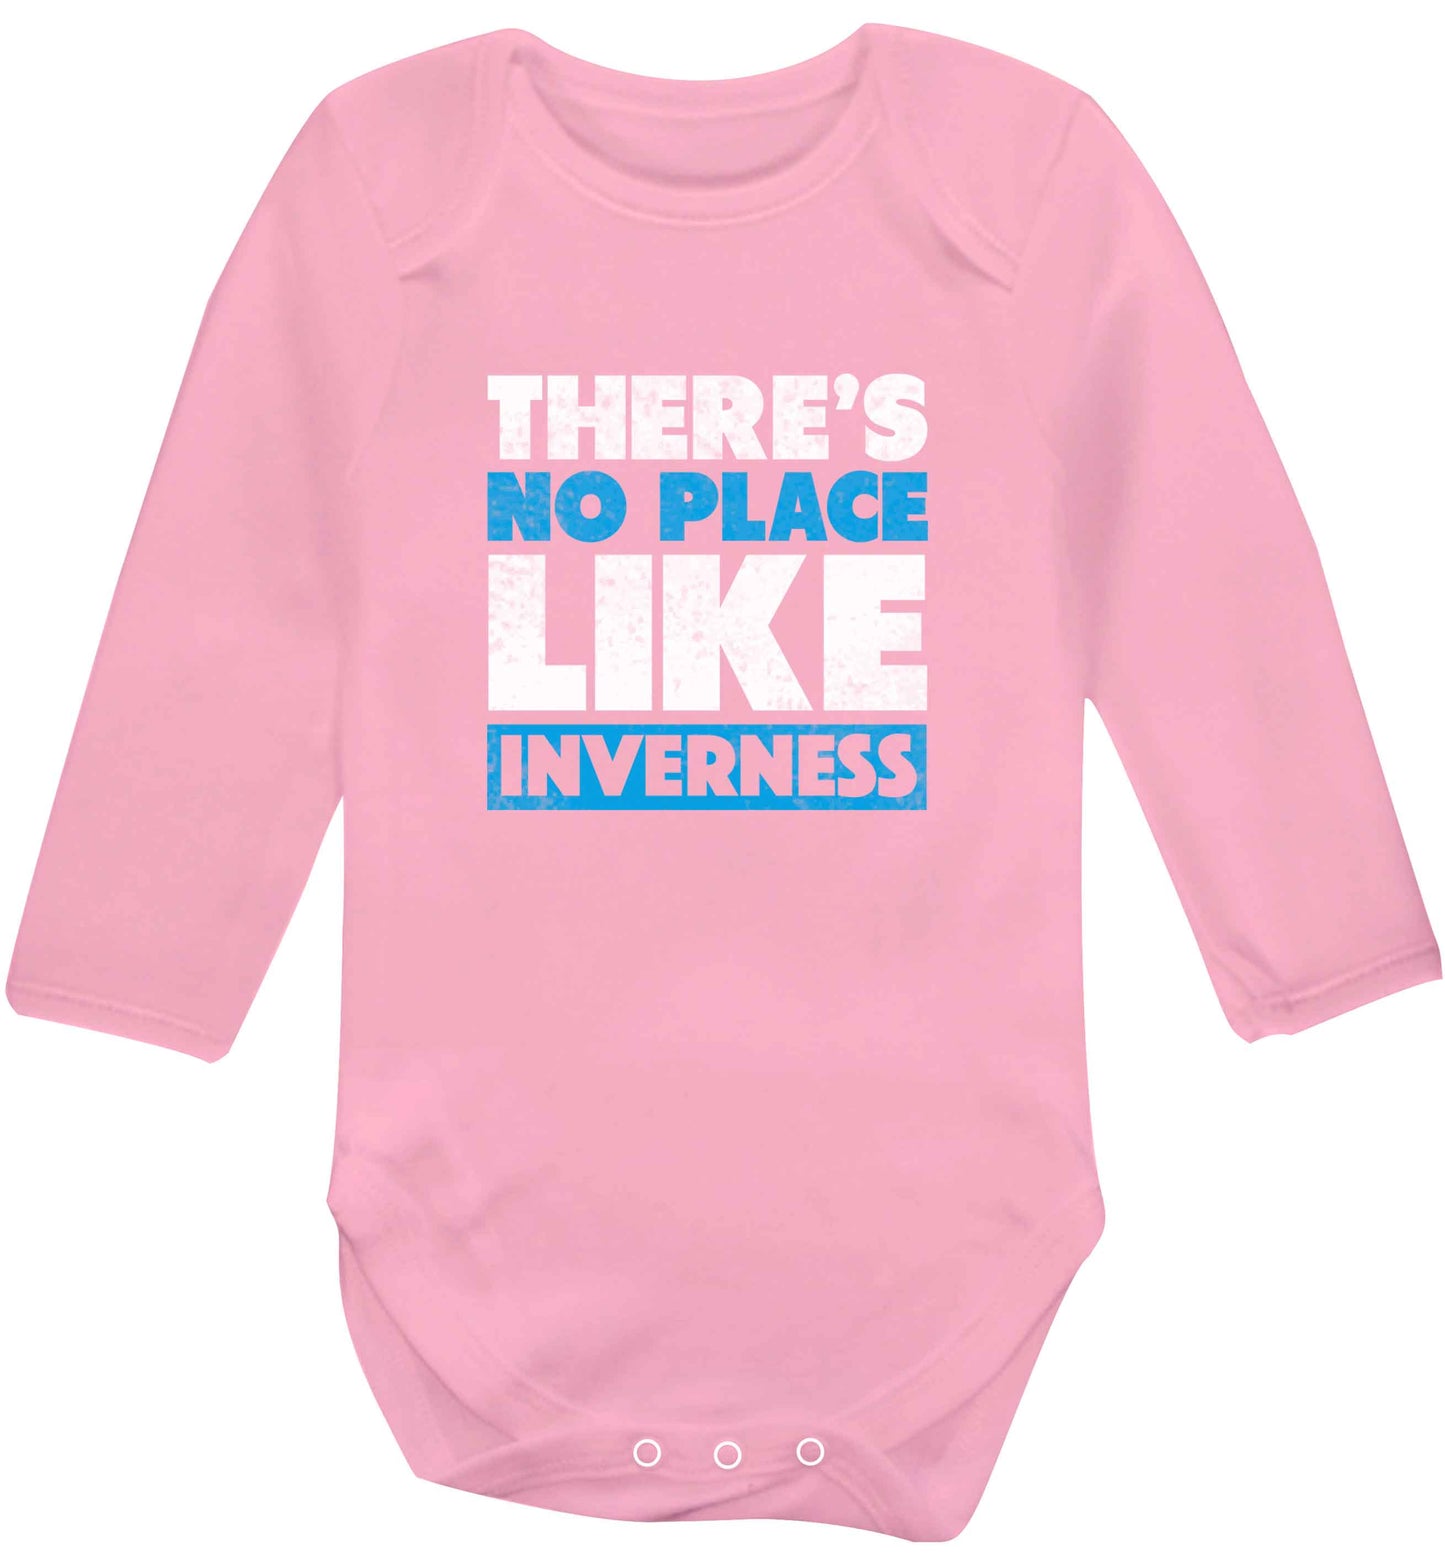 There's no place like Inverness baby vest long sleeved pale pink 6-12 months